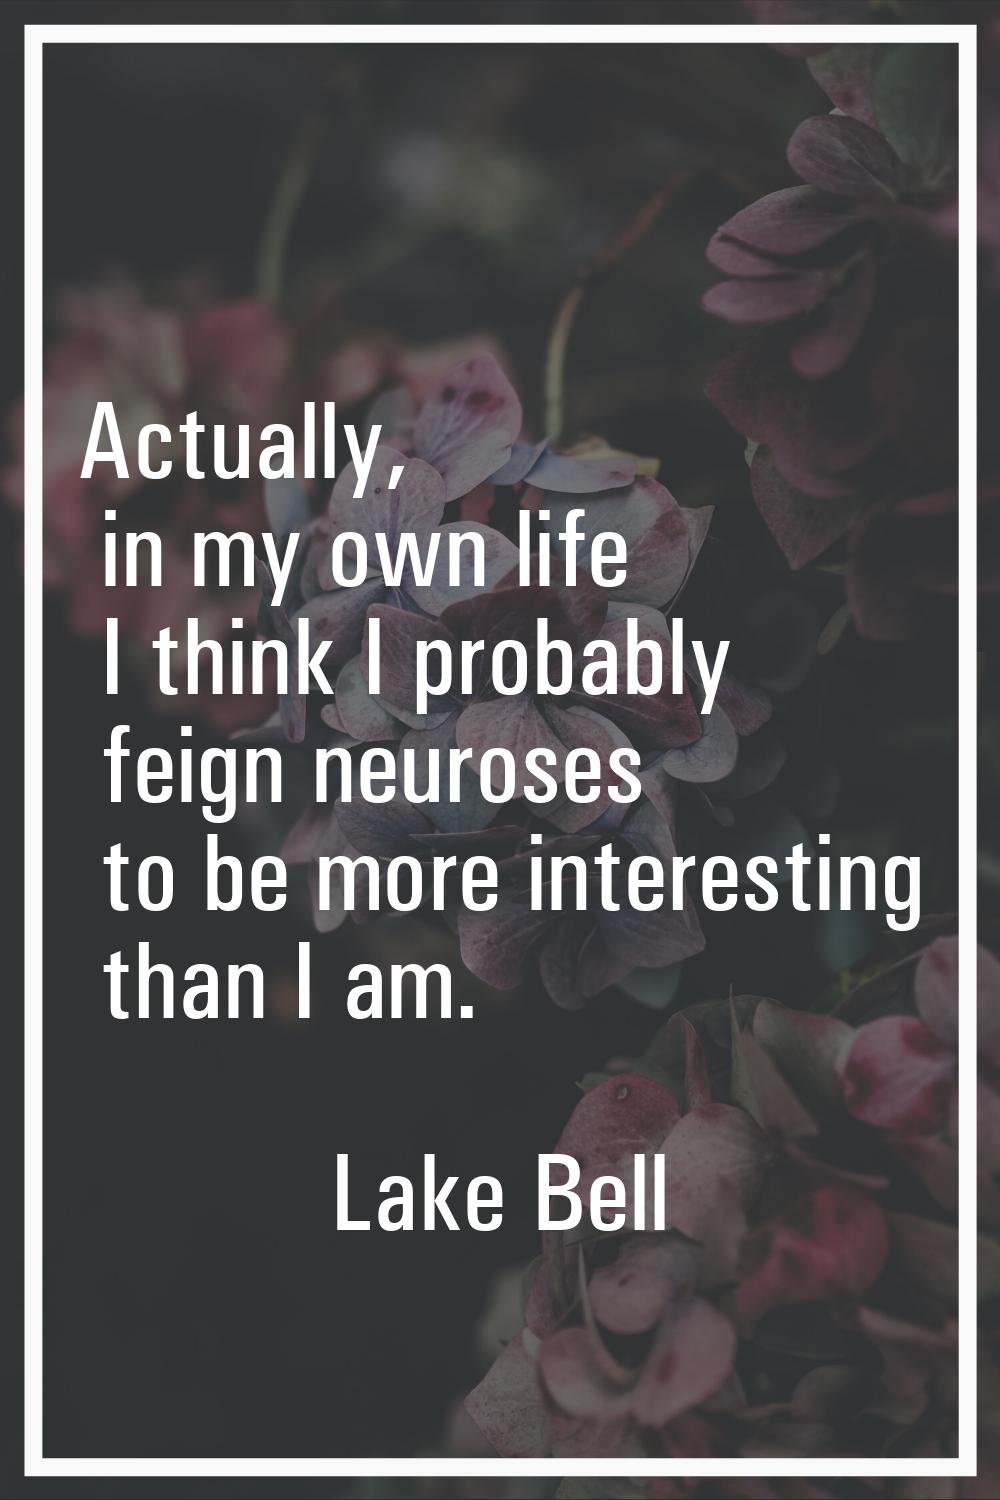 Actually, in my own life I think I probably feign neuroses to be more interesting than I am.